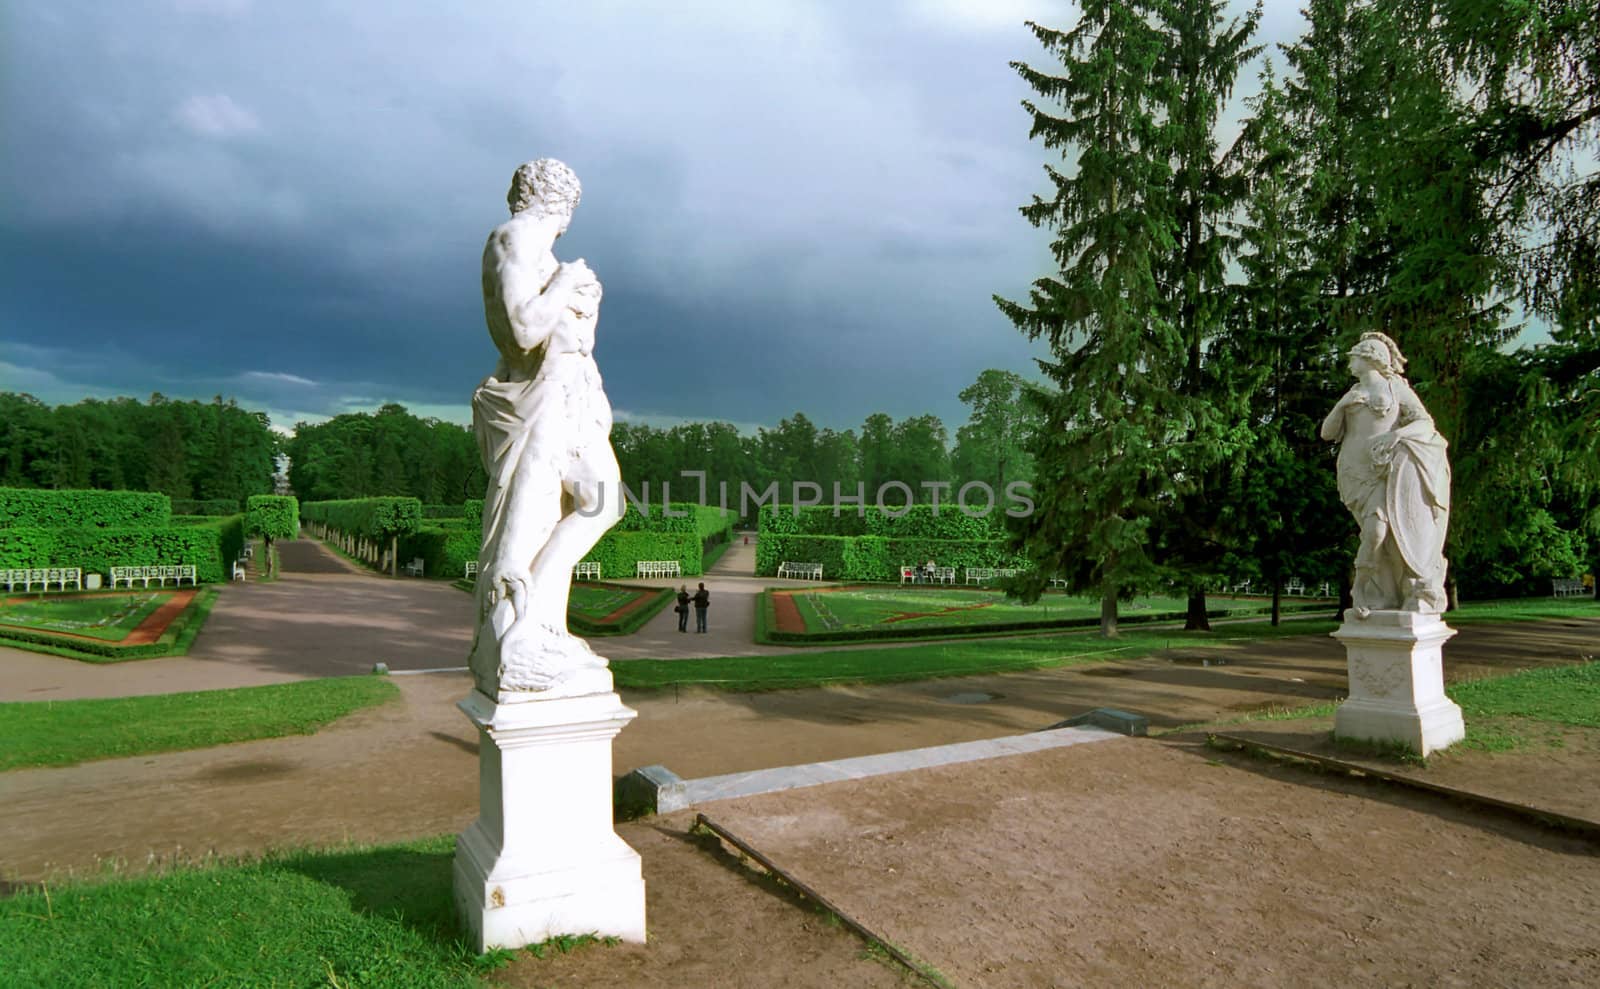 Classical statues in park looking at man and woman